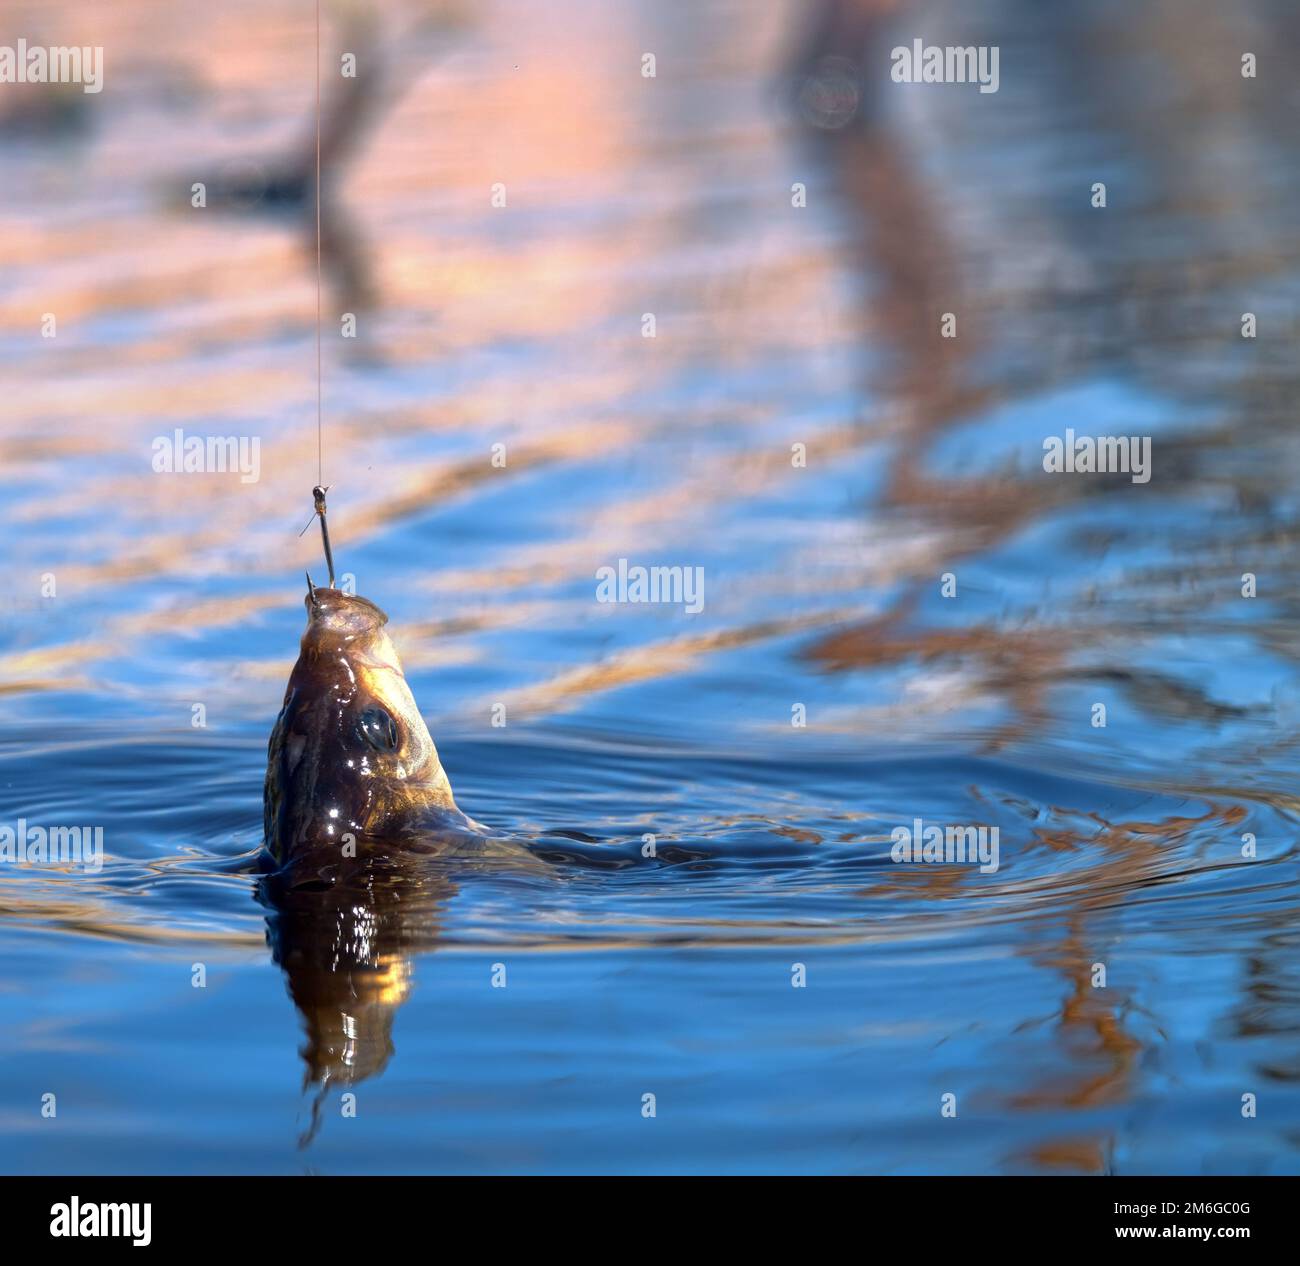 Catching fish with fishing line for bottom fishing in the village on the  small northern river in the spring - sportfishing. Eurasian Ruff fishing.  Pho Stock Photo - Alamy